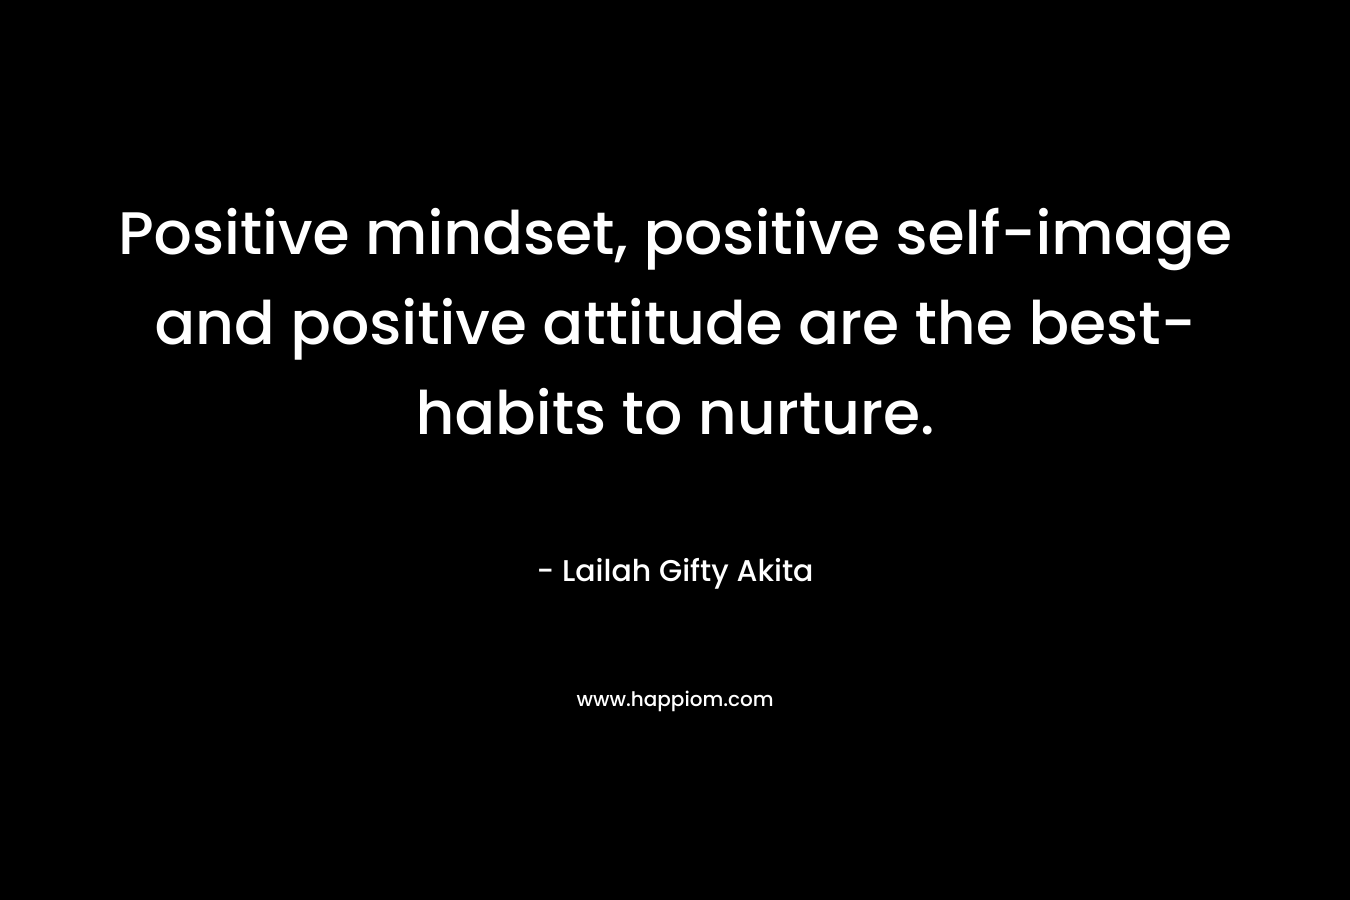 Positive mindset, positive self-image and positive attitude are the best-habits to nurture.